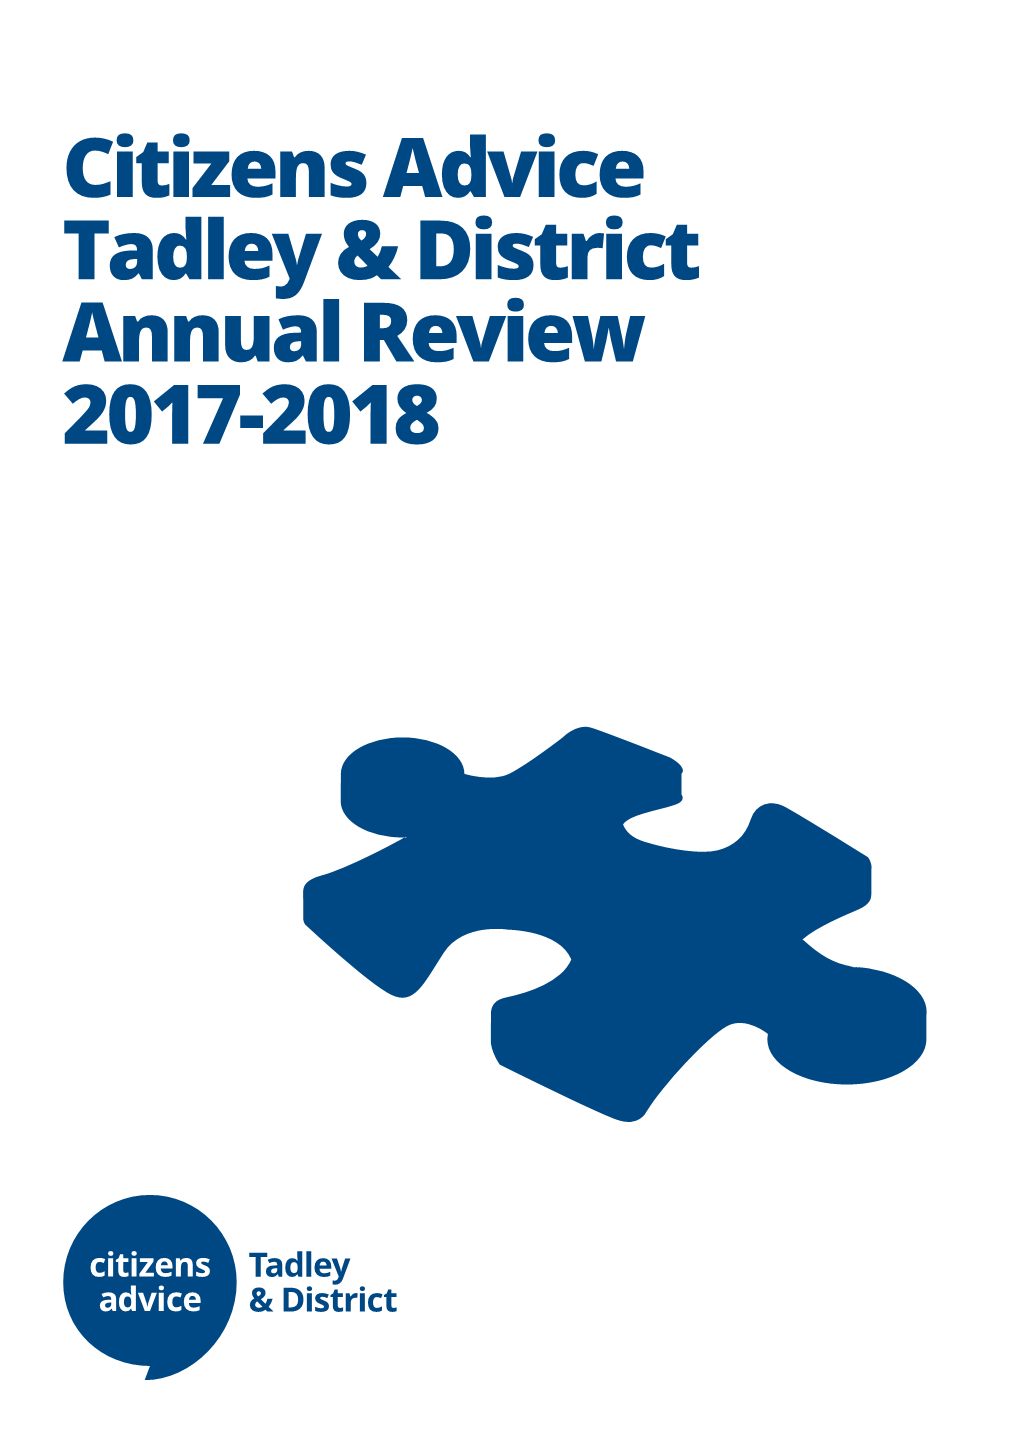 Citizens Advice Tadley & District Annual Review 2017-2018